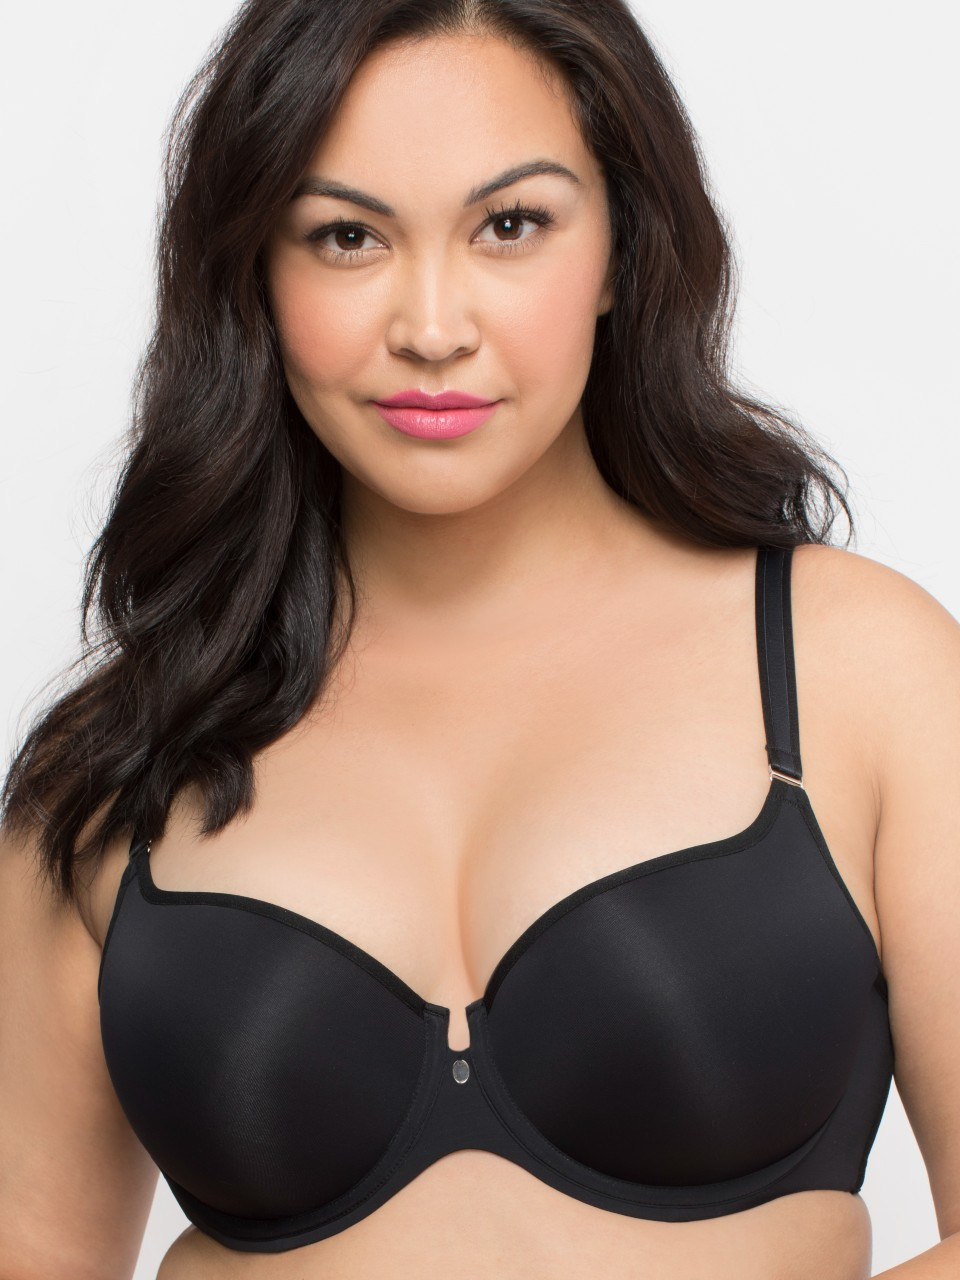 44C Plus Size Bras by Curvy Couture